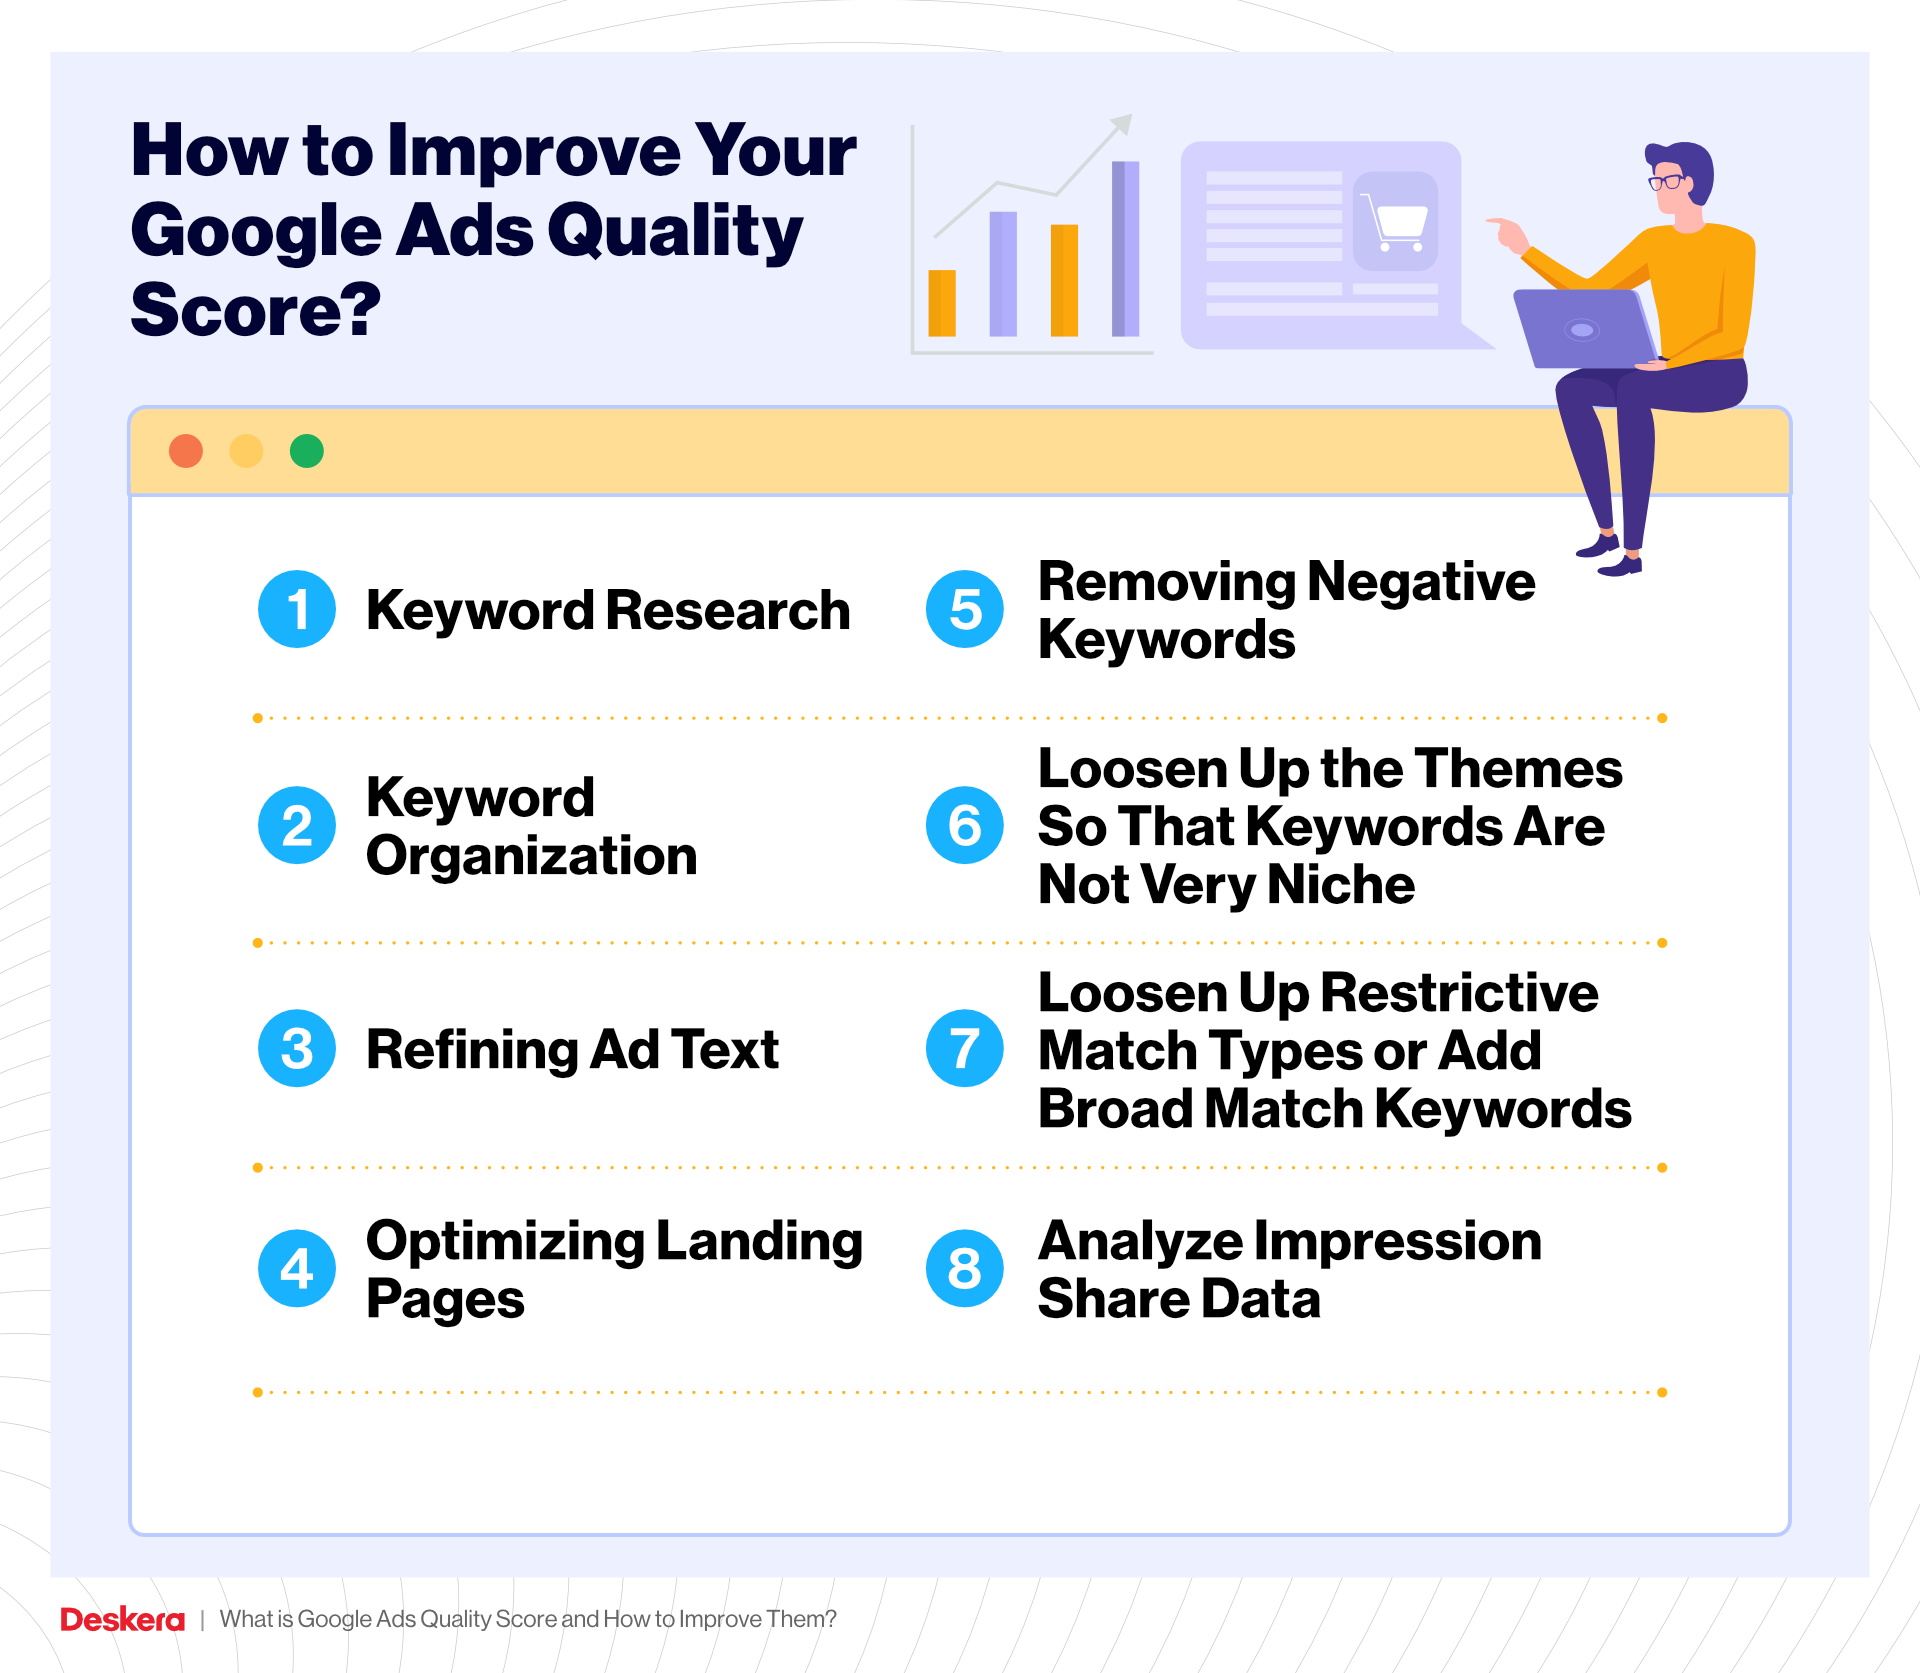 How to Improve Your Google Ads Quality Score?